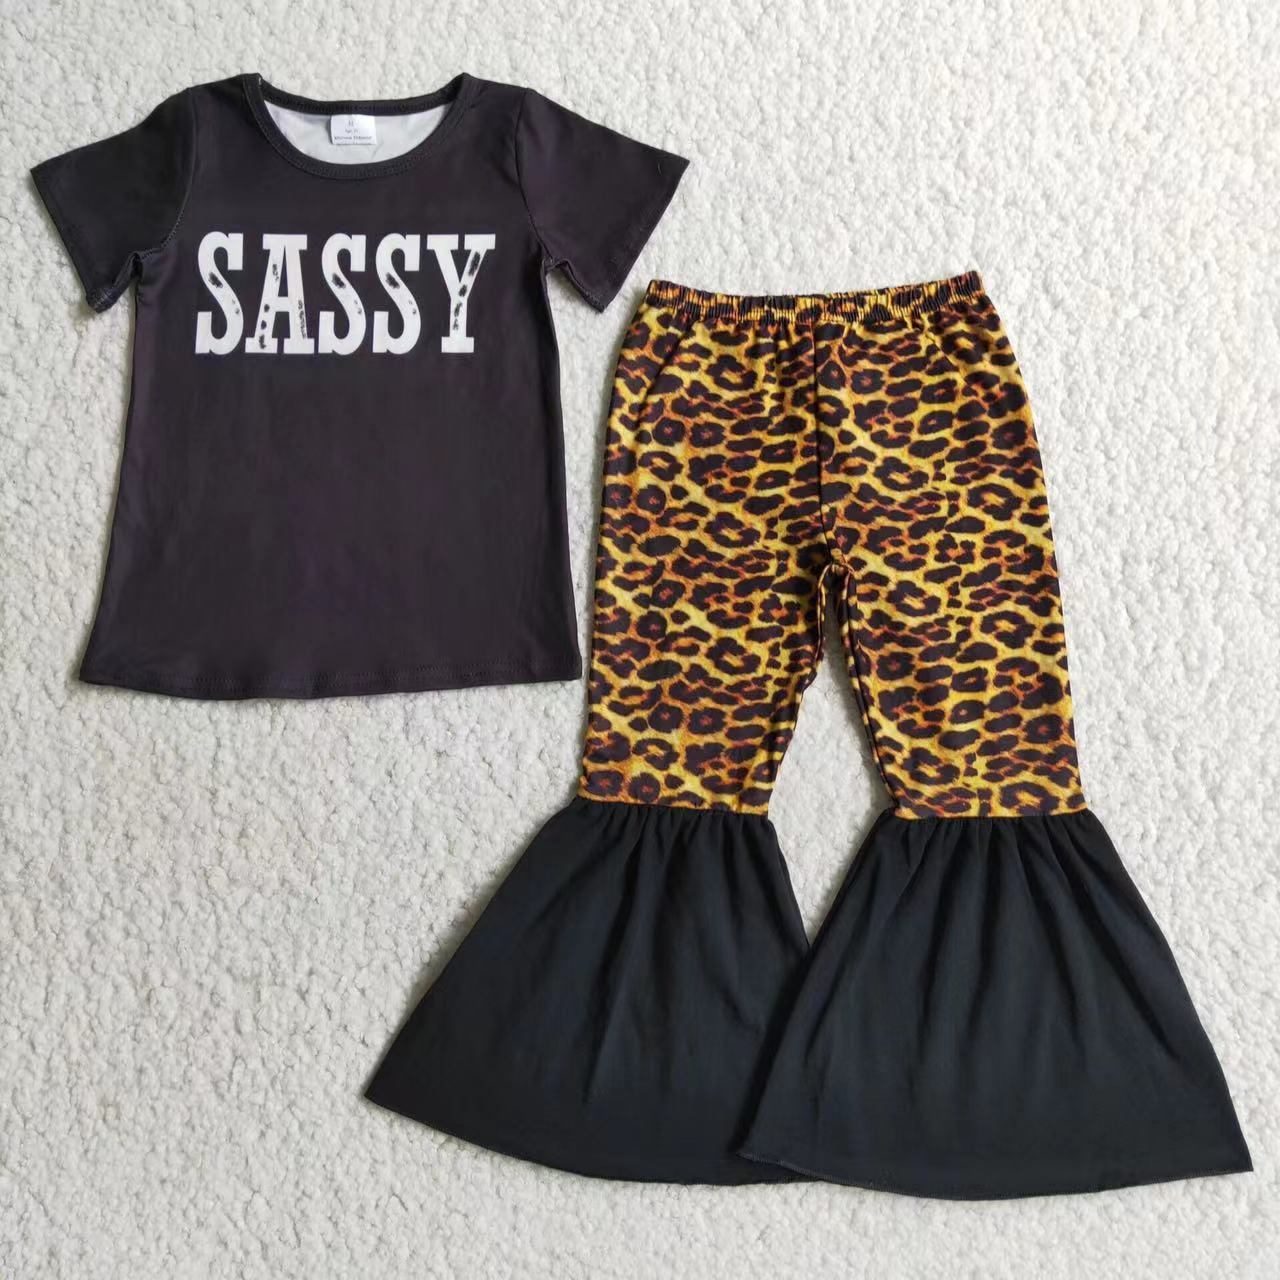 Baby girls sassy outfit